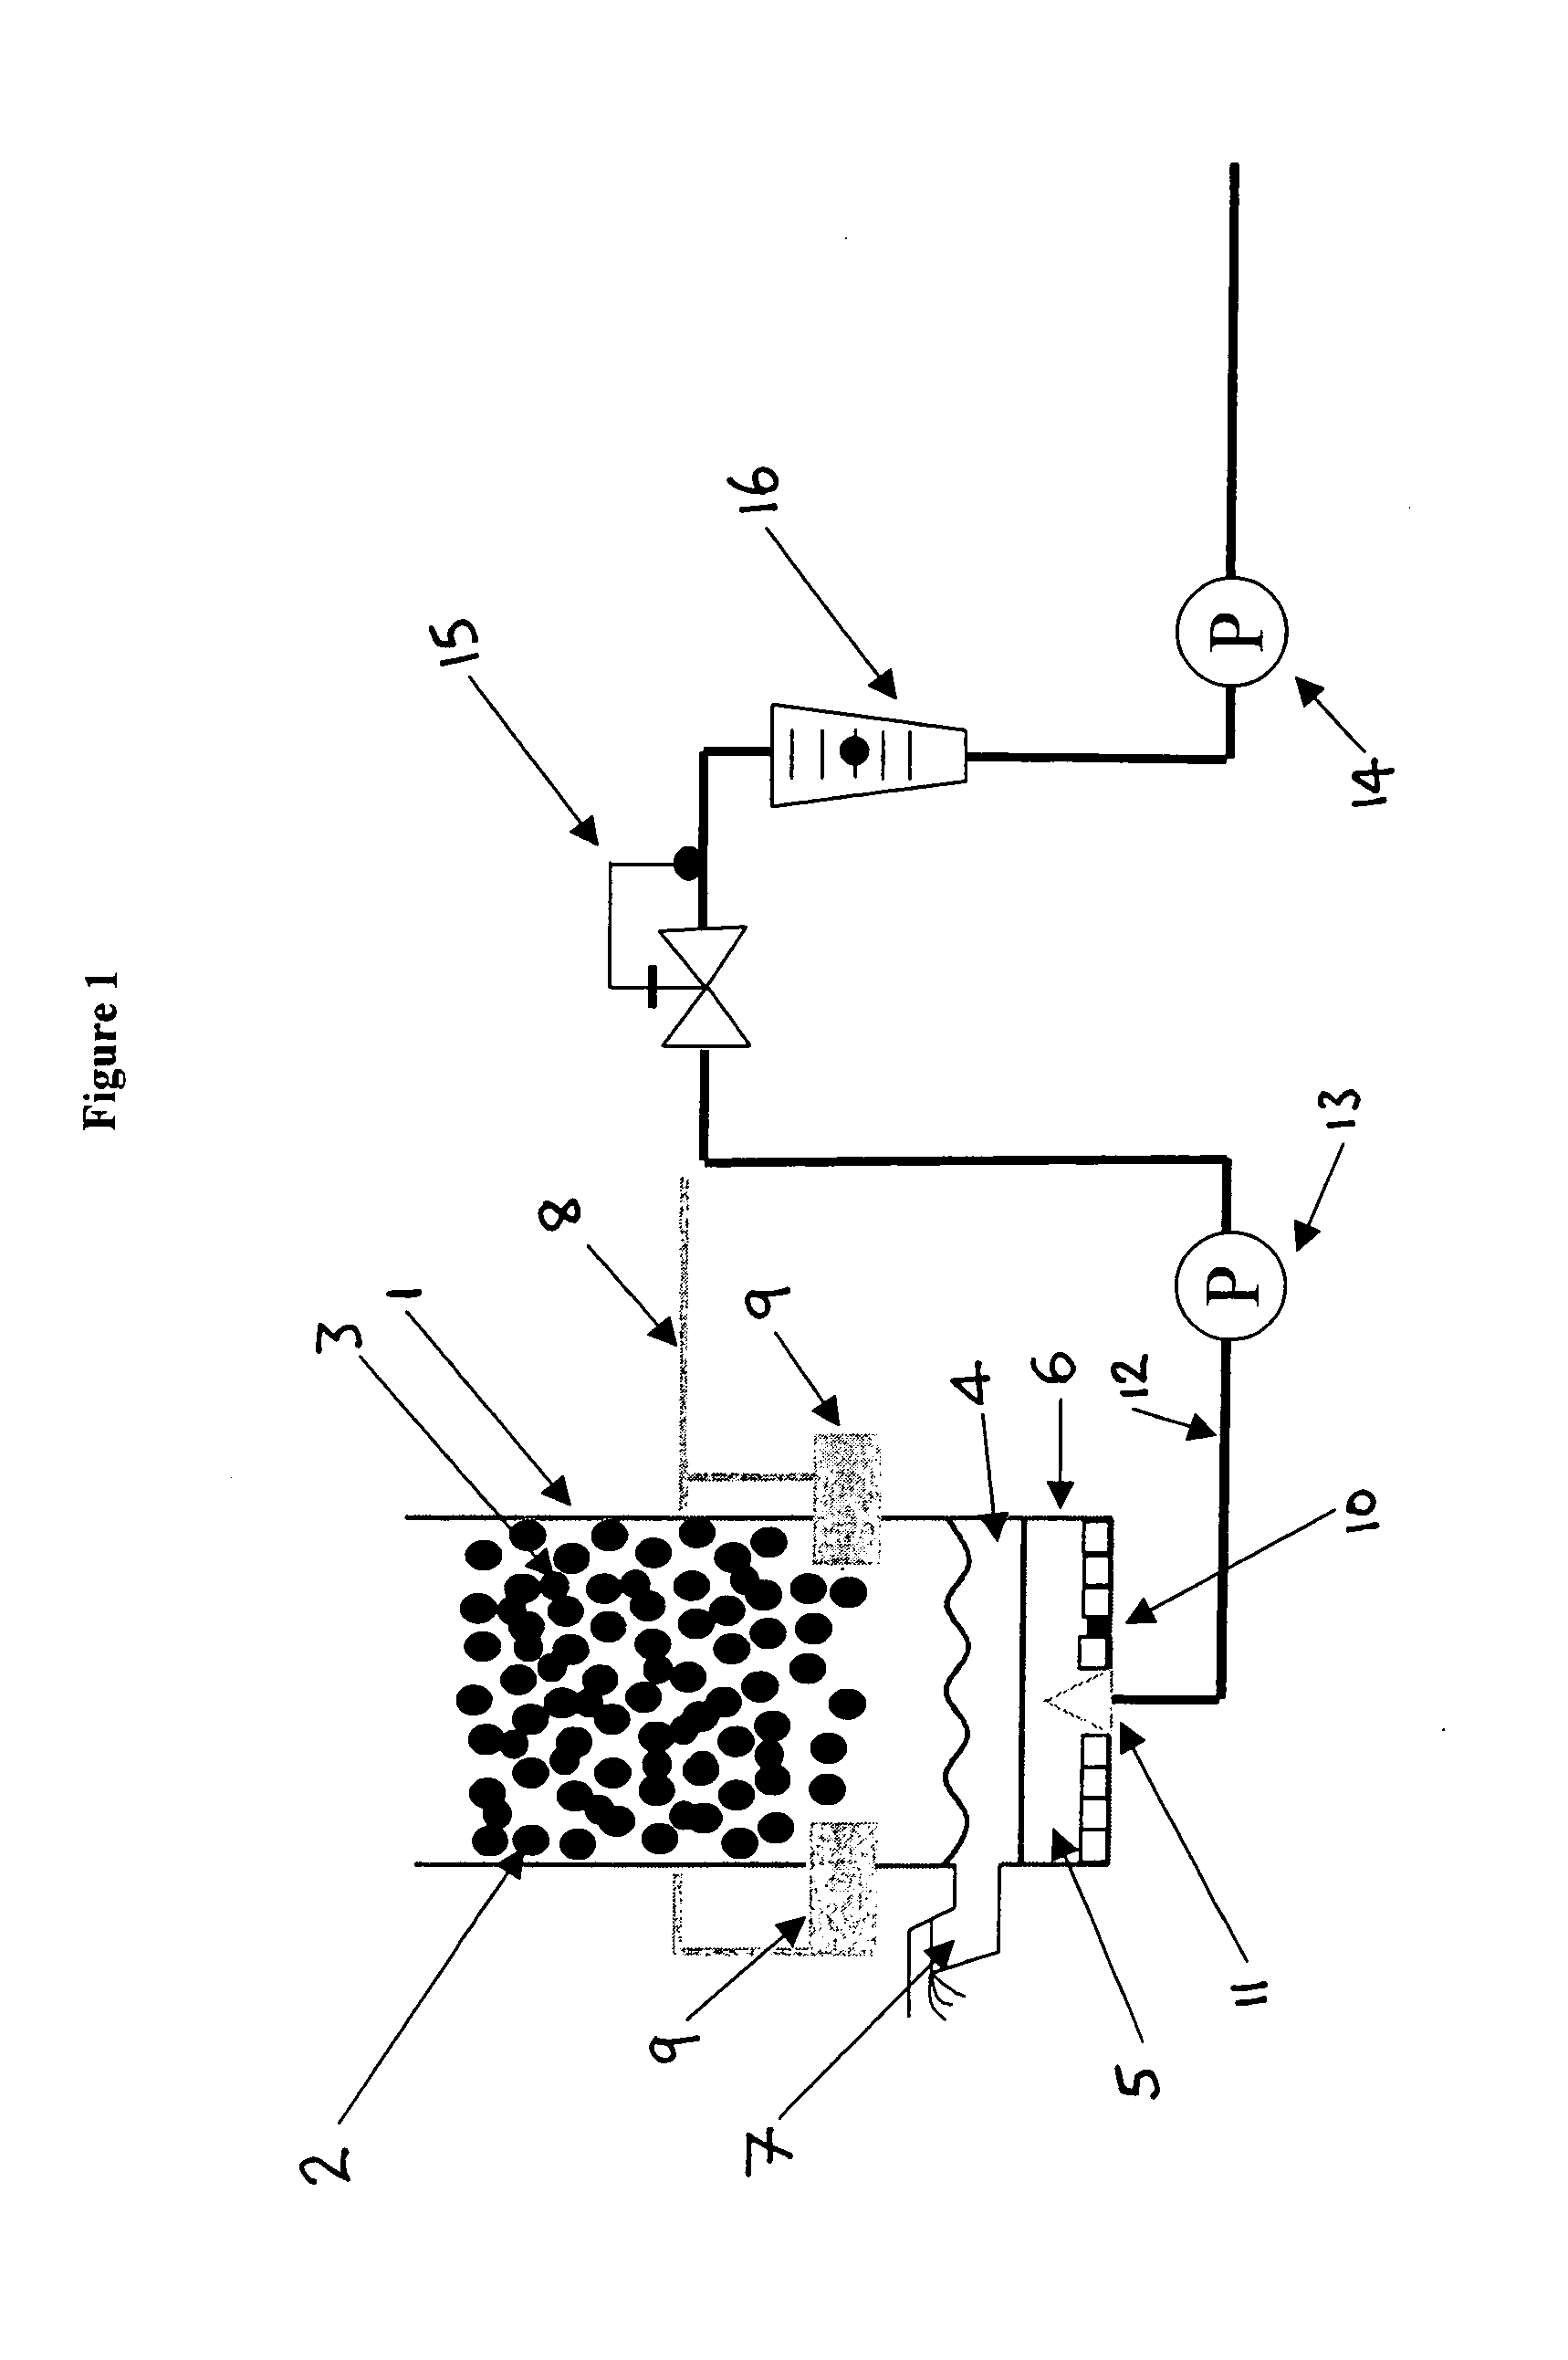 Production of mineral fibers